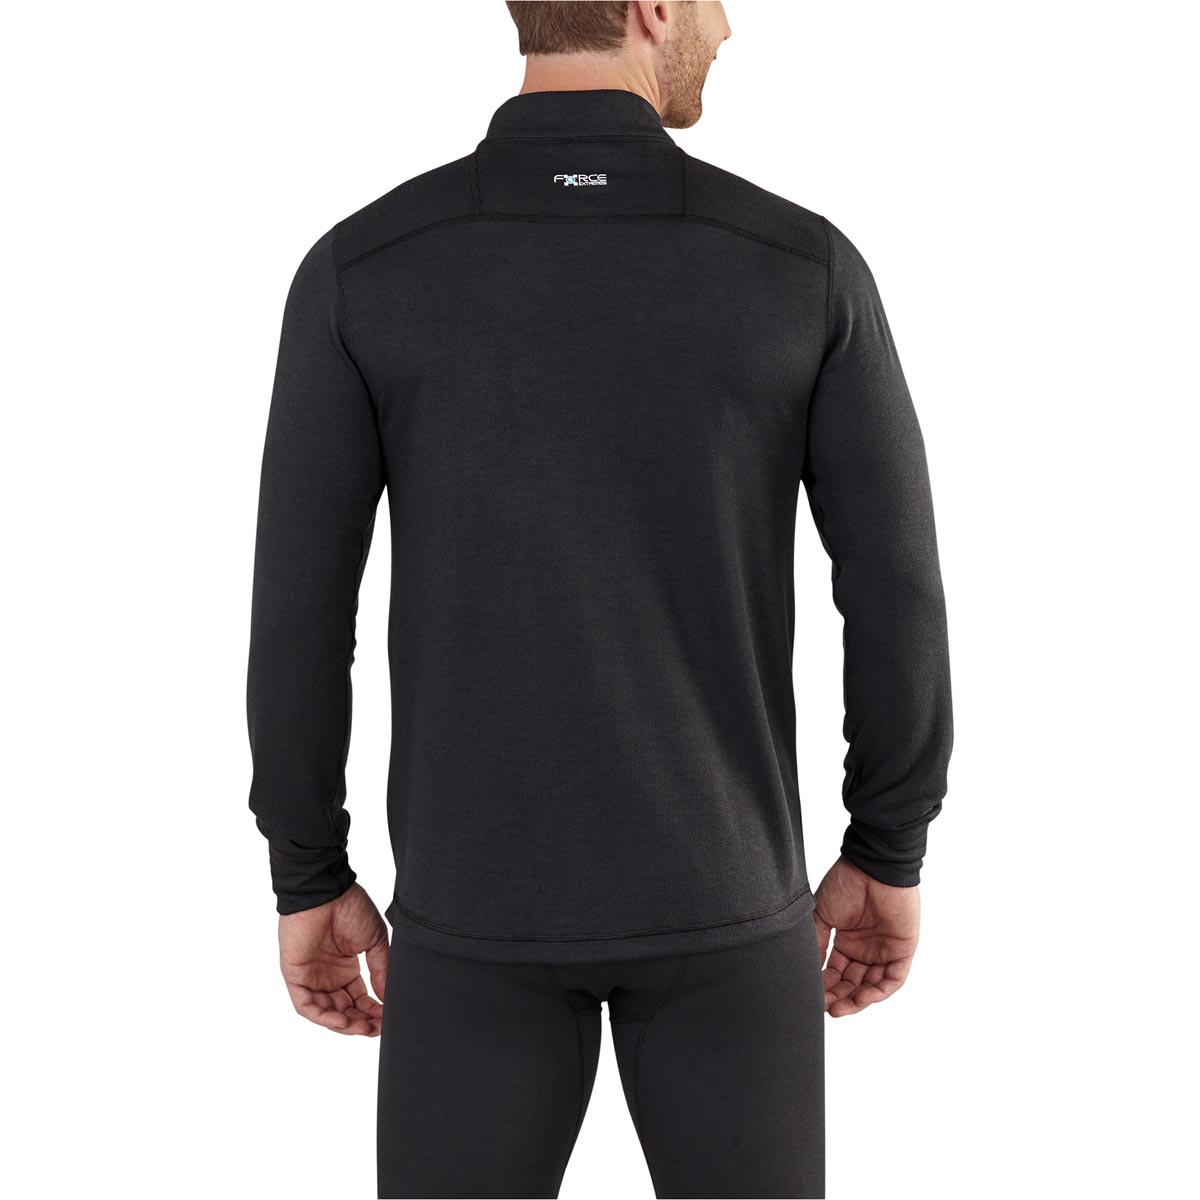 Carhartt Men's Base Force Extremes Cold Weather Quarter Zip